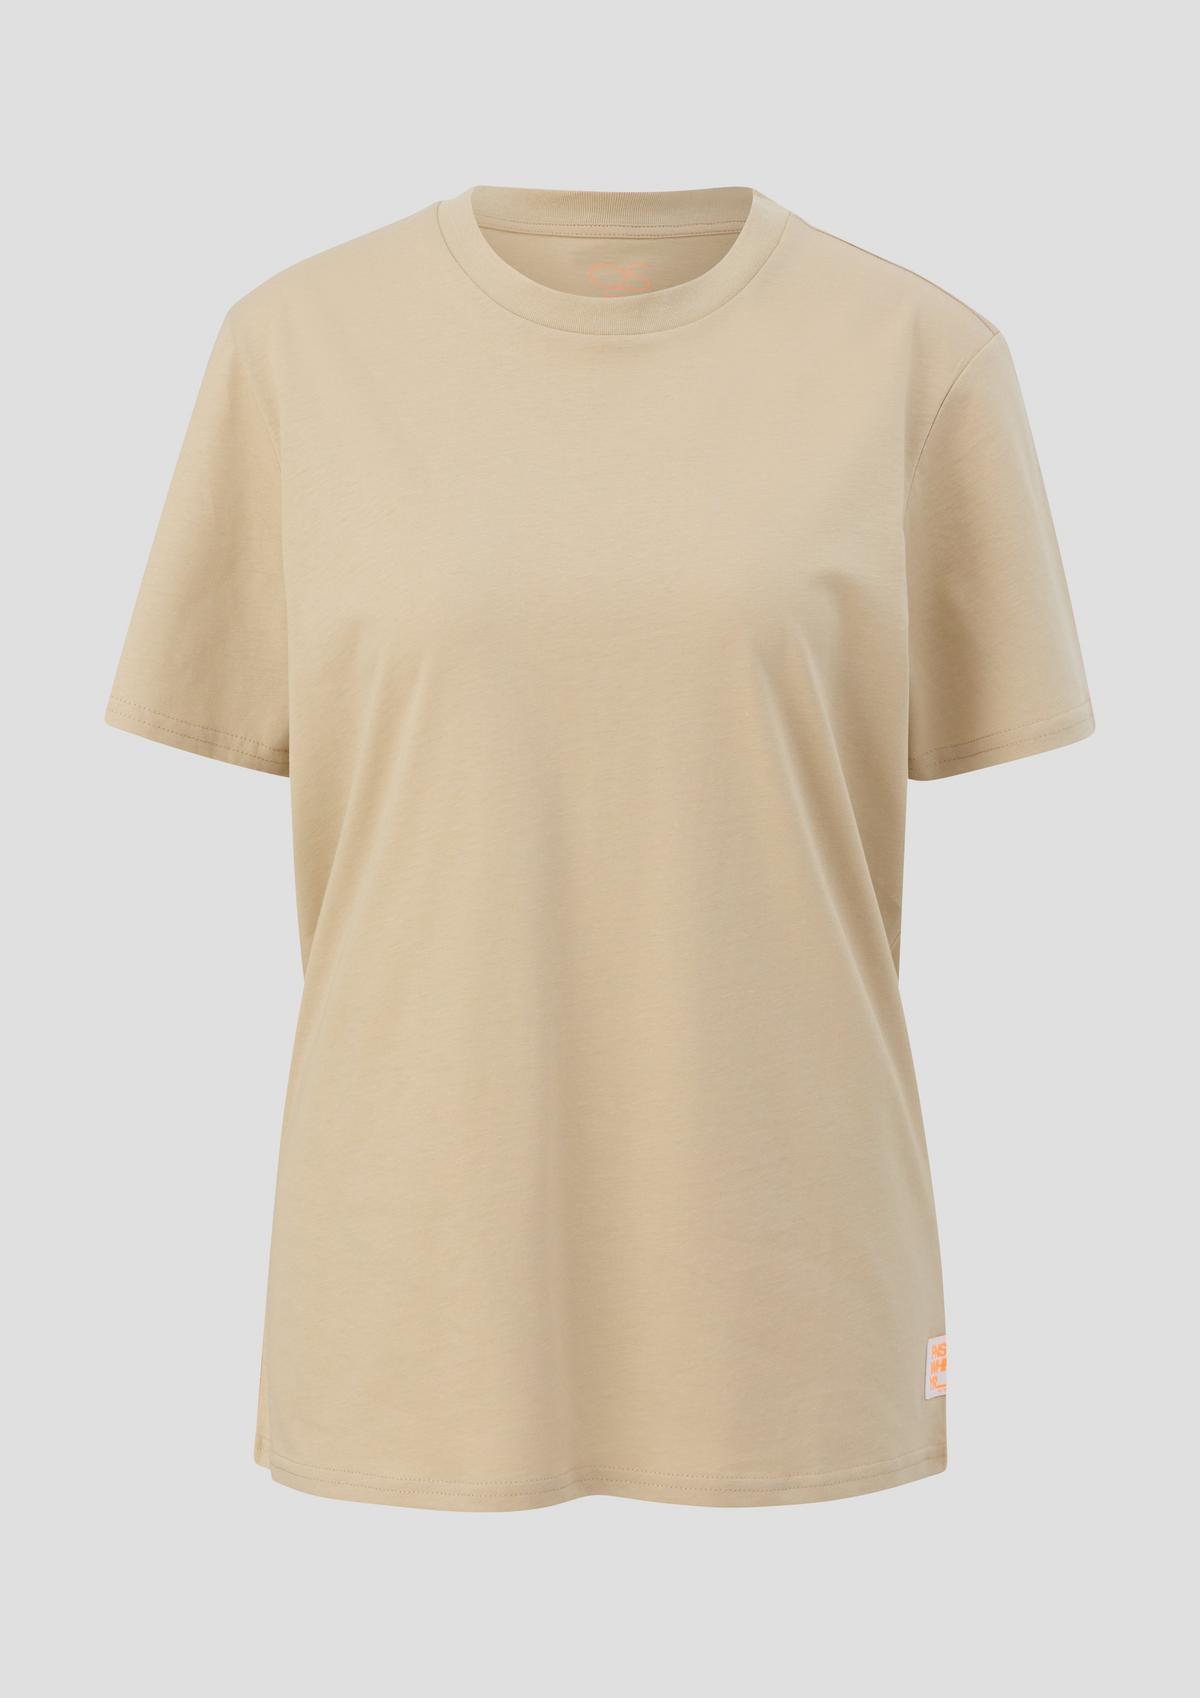 s.Oliver T-shirt made of soft cotton